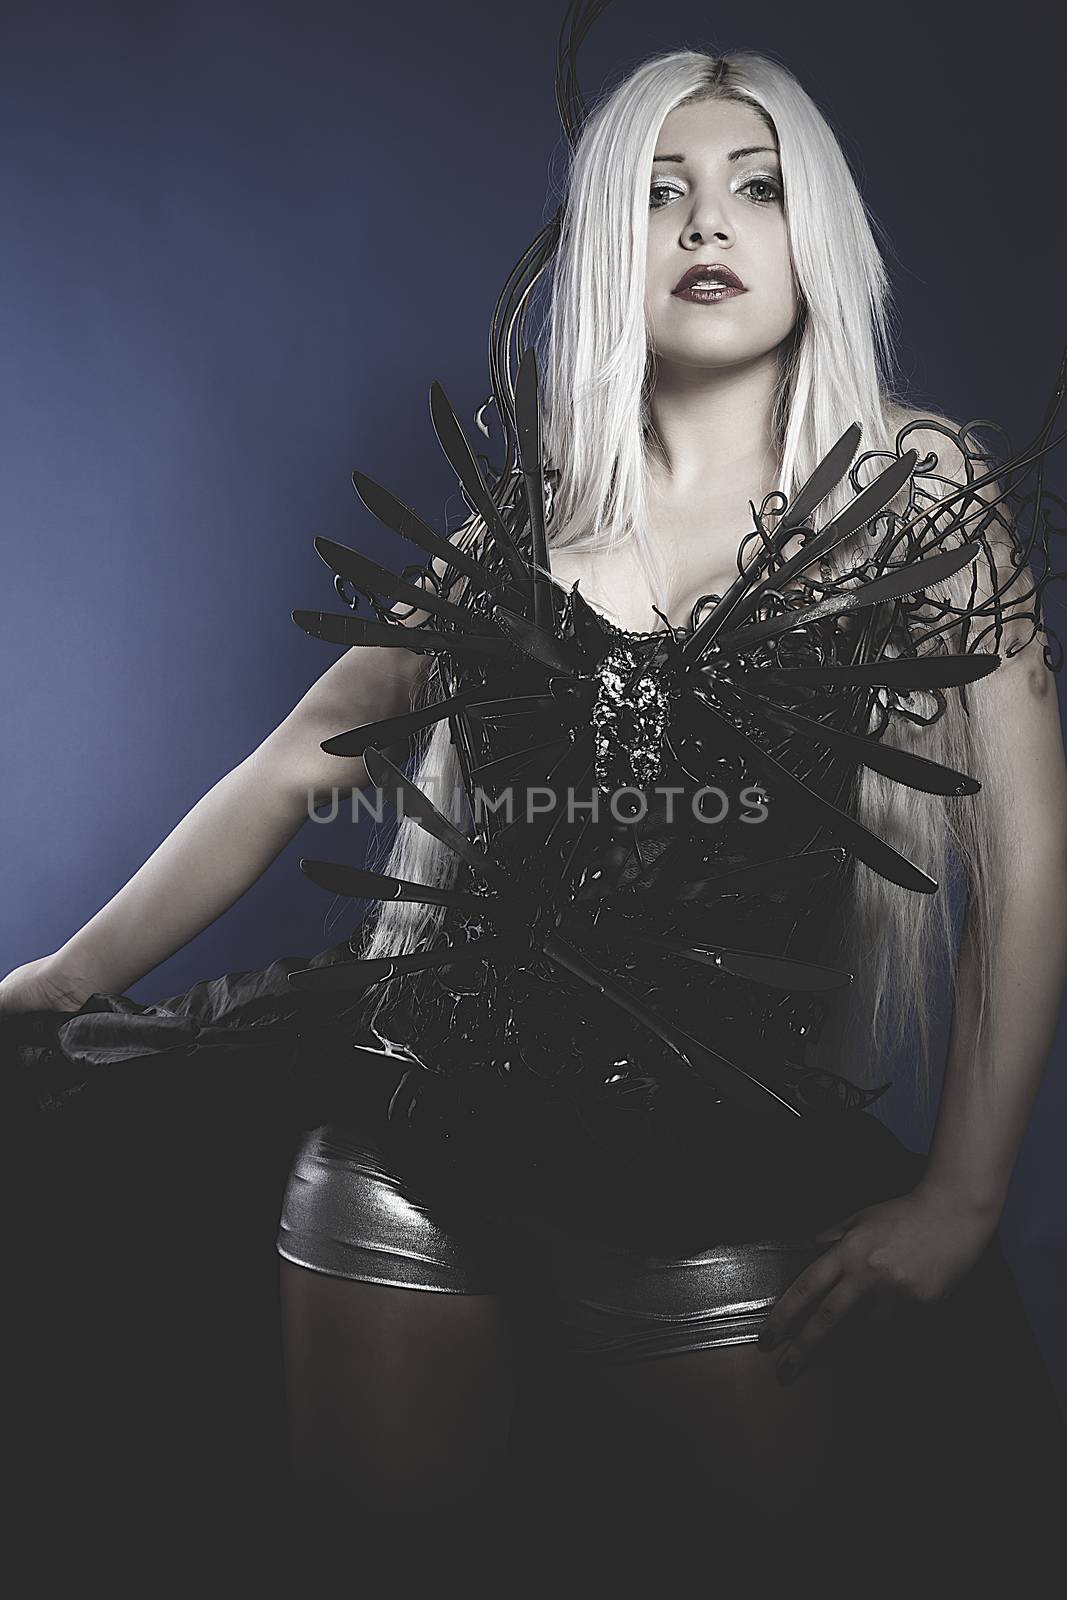 Knifes dress, Gothic, Beautiful woman with white hair and beautiful eyes